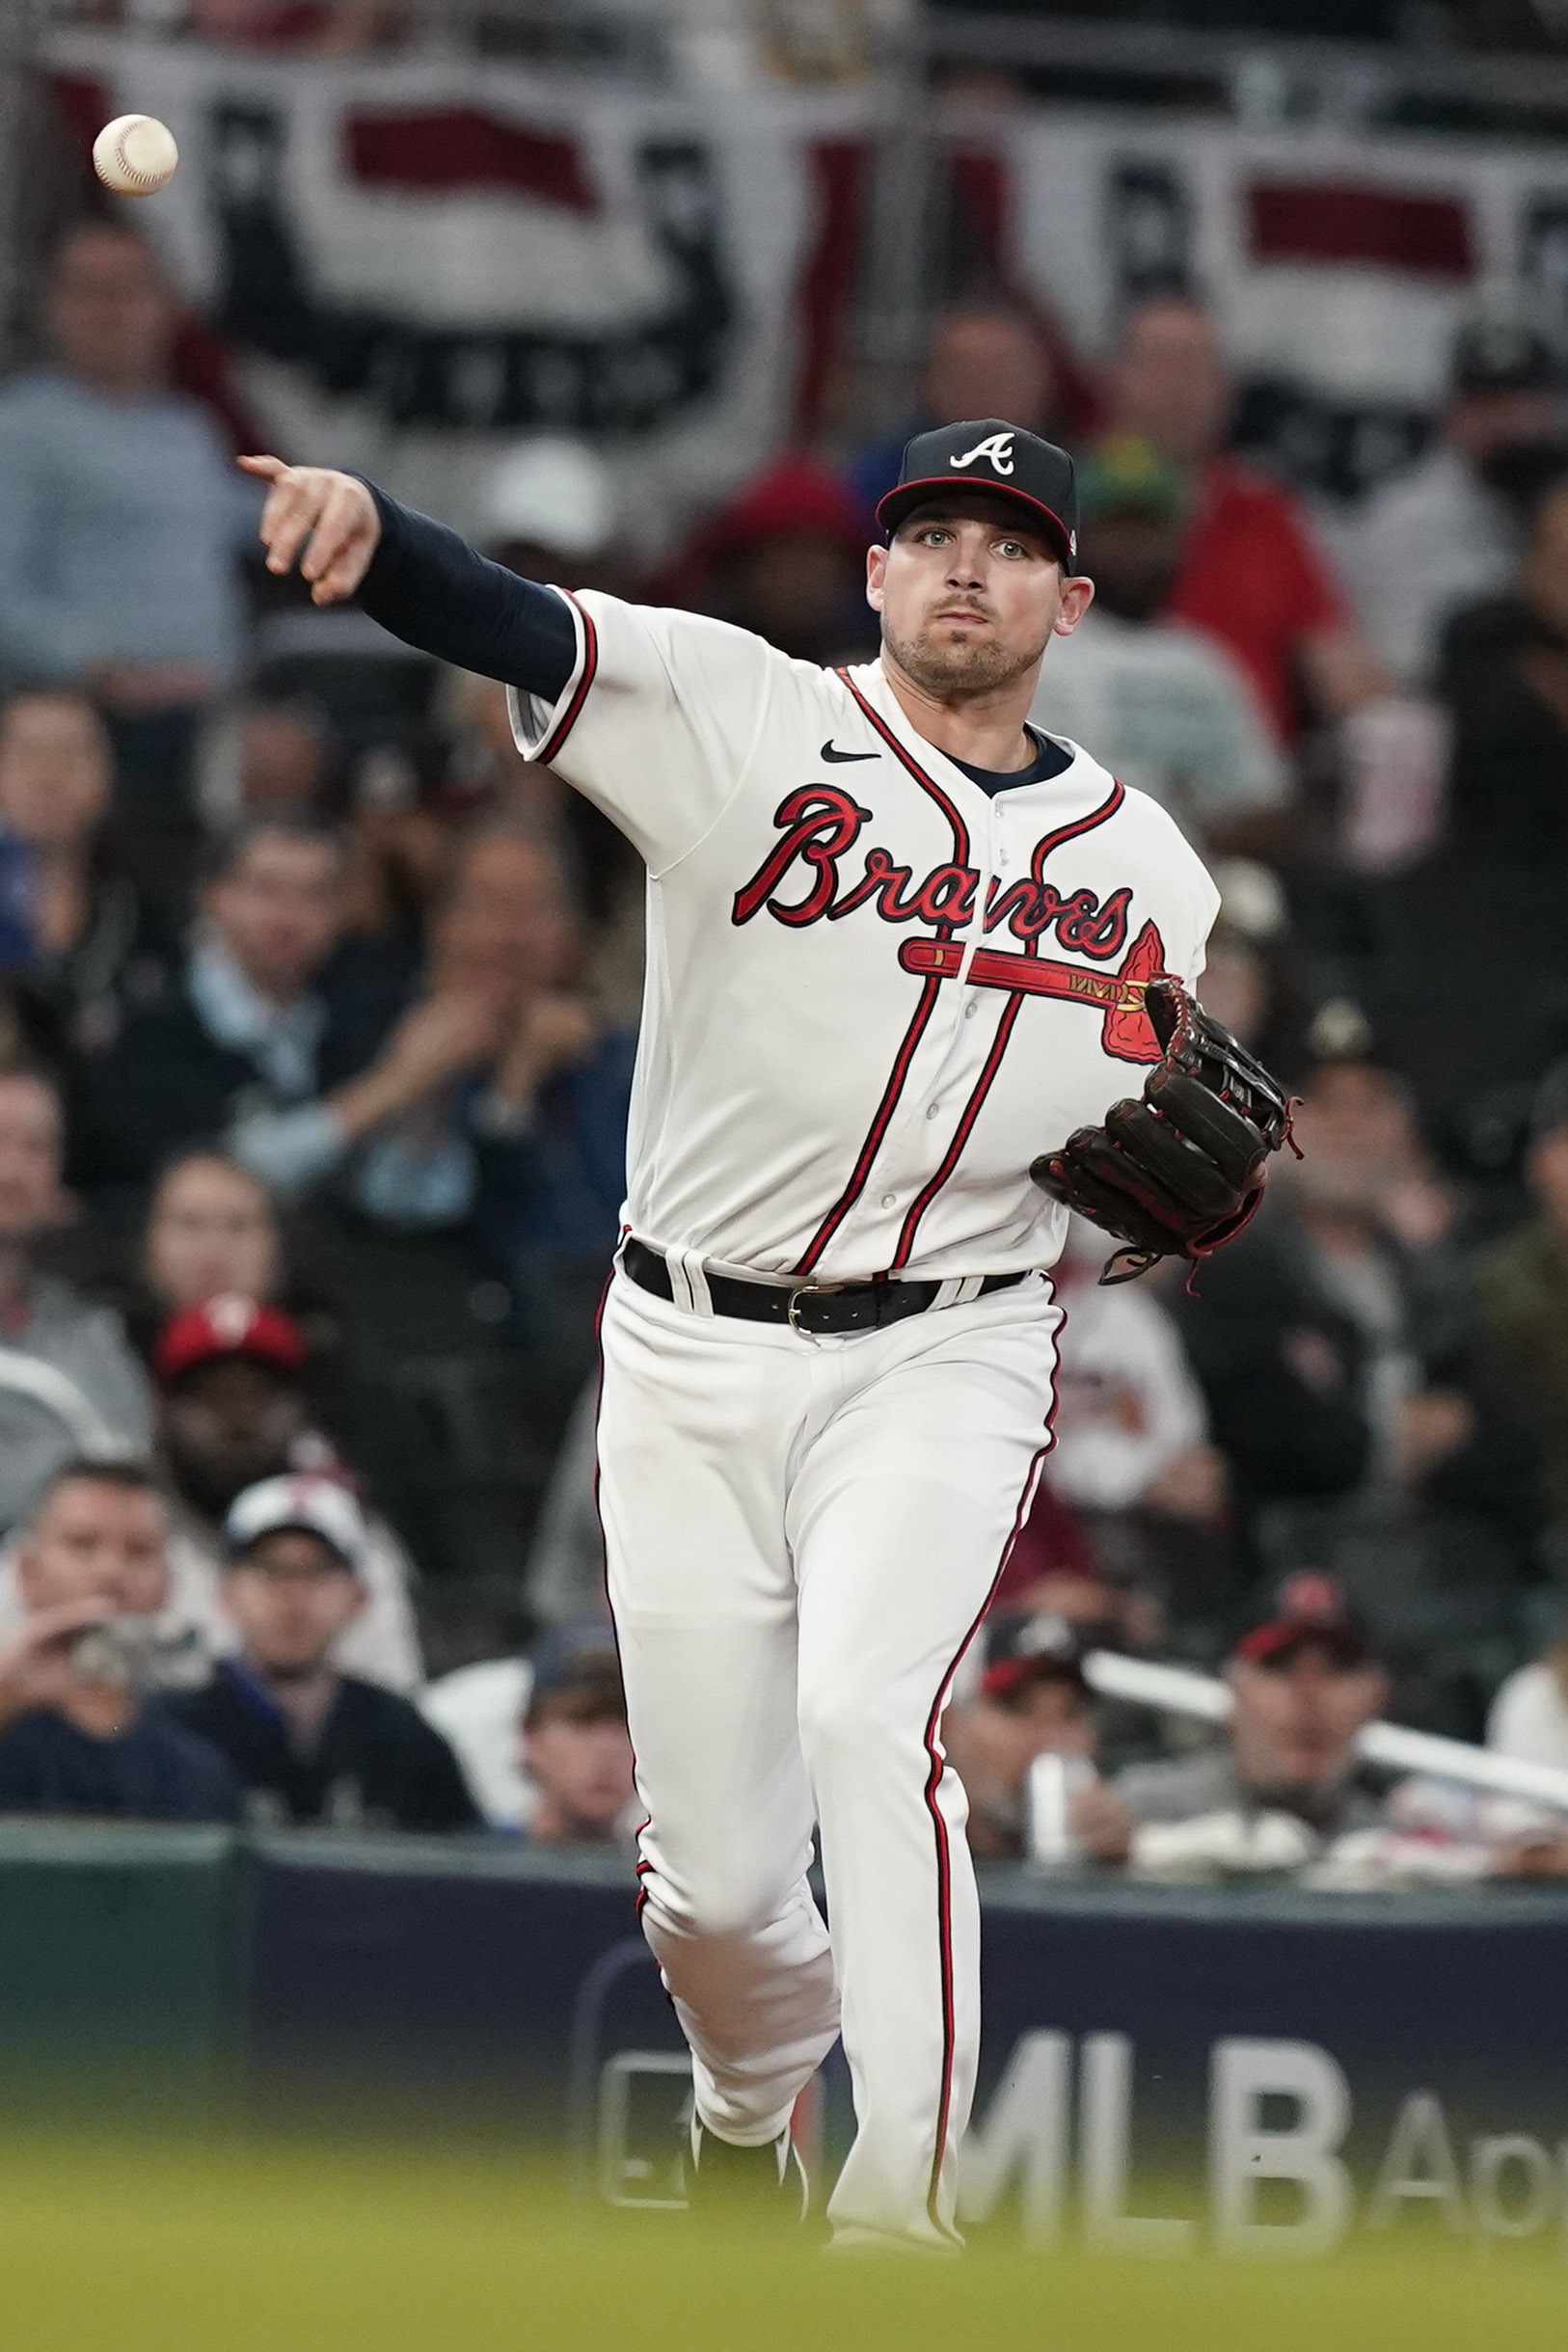 Chipper Jones on Austin Riley: I don't think he's hit his ceiling